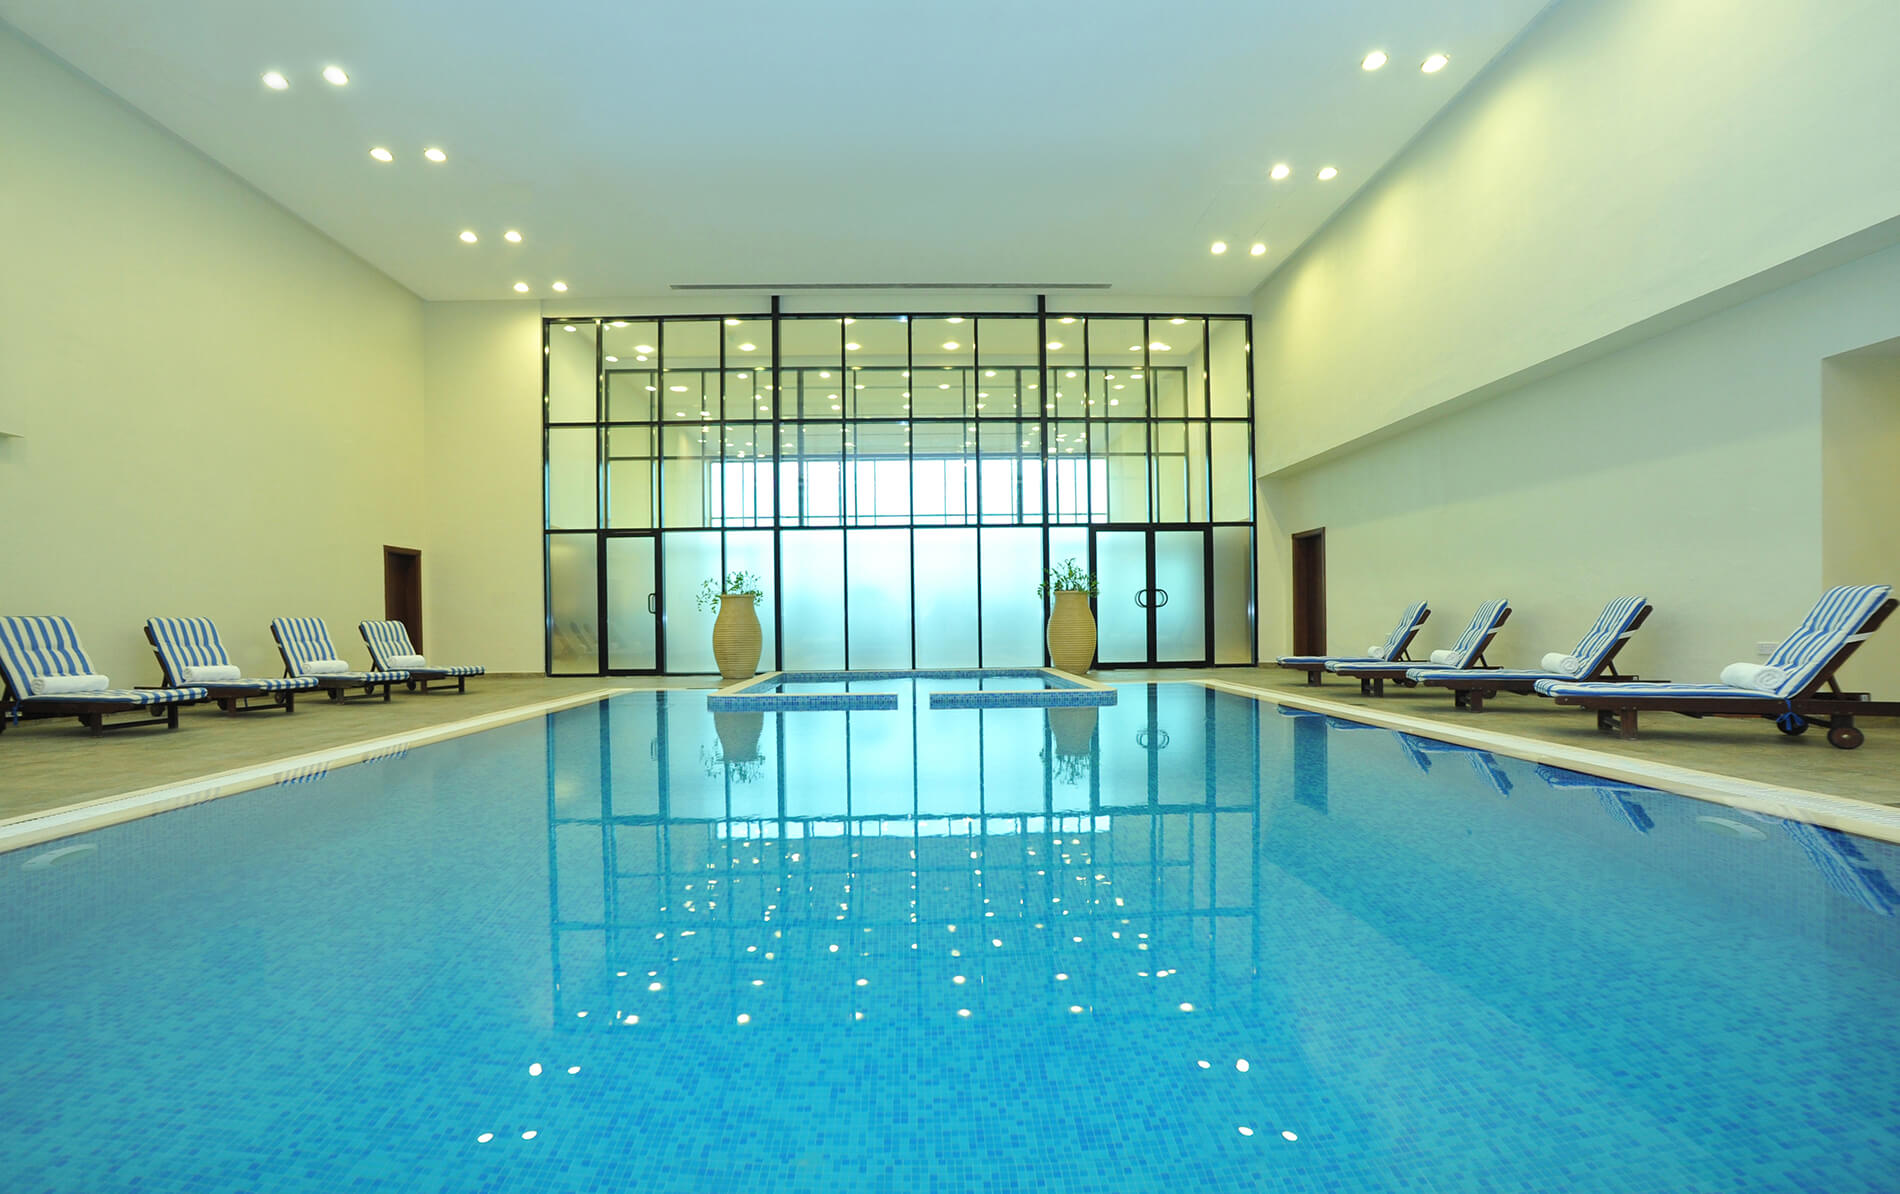 {"id":12,"facility_id":11,"lang_id":1,"hotel_id":201000004,"name":"Indoor Swimming Pool","slug":"indoor-swimming-pool","description":"<p>Whether you want to cool down and ease those aching muscles after a workout or simply take a relaxing swim, take a dip in the temperature-controlled indoor swimming pool. What&rsquo;s more, with a separate a kid&rsquo;s pool, this is the perfect place for the whole family to enjoy a fun escape from the heat of the day.<\/p>\r\n\r\n<p>Ramada Hotel &amp; Suites by Wyndham Ajman offers. It also offers swimming lessons for kids to provide your children with the confidence and freedom to enjoy swimming and water-based recreation, under the supervision of a professional swimming instructor.<\/p>\r\n\r\n<p>[break]<\/p>\r\n\r\n<table class=\"table table-dark table-striped table-bordered\">\r\n\t<thead>\r\n\t\t<tr>\r\n\t\t\t<th>Facility<\/th>\r\n\t\t\t<th>Timing<\/th>\r\n\t\t<\/tr>\r\n\t<\/thead>\r\n\t<tbody>\r\n\t\t<tr>\r\n\t\t\t<td>Indoor Swimming Pool<\/td>\r\n\t\t\t<td>From 07:00 am to 11:00 pm<\/td>\r\n\t\t<\/tr>\r\n\t<\/tbody>\r\n<\/table>\r\n\r\n<div id=\"selection_bubble\" style=\"position:absolute;\tvisibility:hidden; padding:15px; color:#333; background-color: white; border: 5px solid black; border-radius:10px; width:300px; z-index:10000\">&nbsp;<\/div>\r\n\r\n<div id=\"selection_bubble\" style=\"position:absolute;\tvisibility:hidden; padding:15px; color:#333; background-color: white; border: 5px solid black; border-radius:10px; width:300px; z-index:10000\">&nbsp;<\/div>\r\n\r\n<div id=\"selection_bubble\" style=\"position:absolute;\tvisibility:hidden; padding:15px; color:#333; background-color: white; border: 5px solid black; border-radius:10px; width:300px; z-index:10000\">&nbsp;<\/div>","sort":3,"status":1,"created_at":"2019-10-30T07:41:00.000000Z","updated_at":"2019-12-17T11:05:03.000000Z","deleted_at":null,"image_slider":{"id":1227,"lang_id":1,"image_sliderable_id":12,"image_sliderable_type":"App\\HotelFacility","image_slider":"uploads\/image-slider\/1eecd0c1f72758c97043853ec93f2ac01574061457.jpg","name":null,"sub_name":null,"content":null,"status":1,"created_at":"2019-11-18T07:17:37.000000Z","updated_at":"2019-11-18T07:17:37.000000Z","sort":null,"is_mobile":0}}-slider